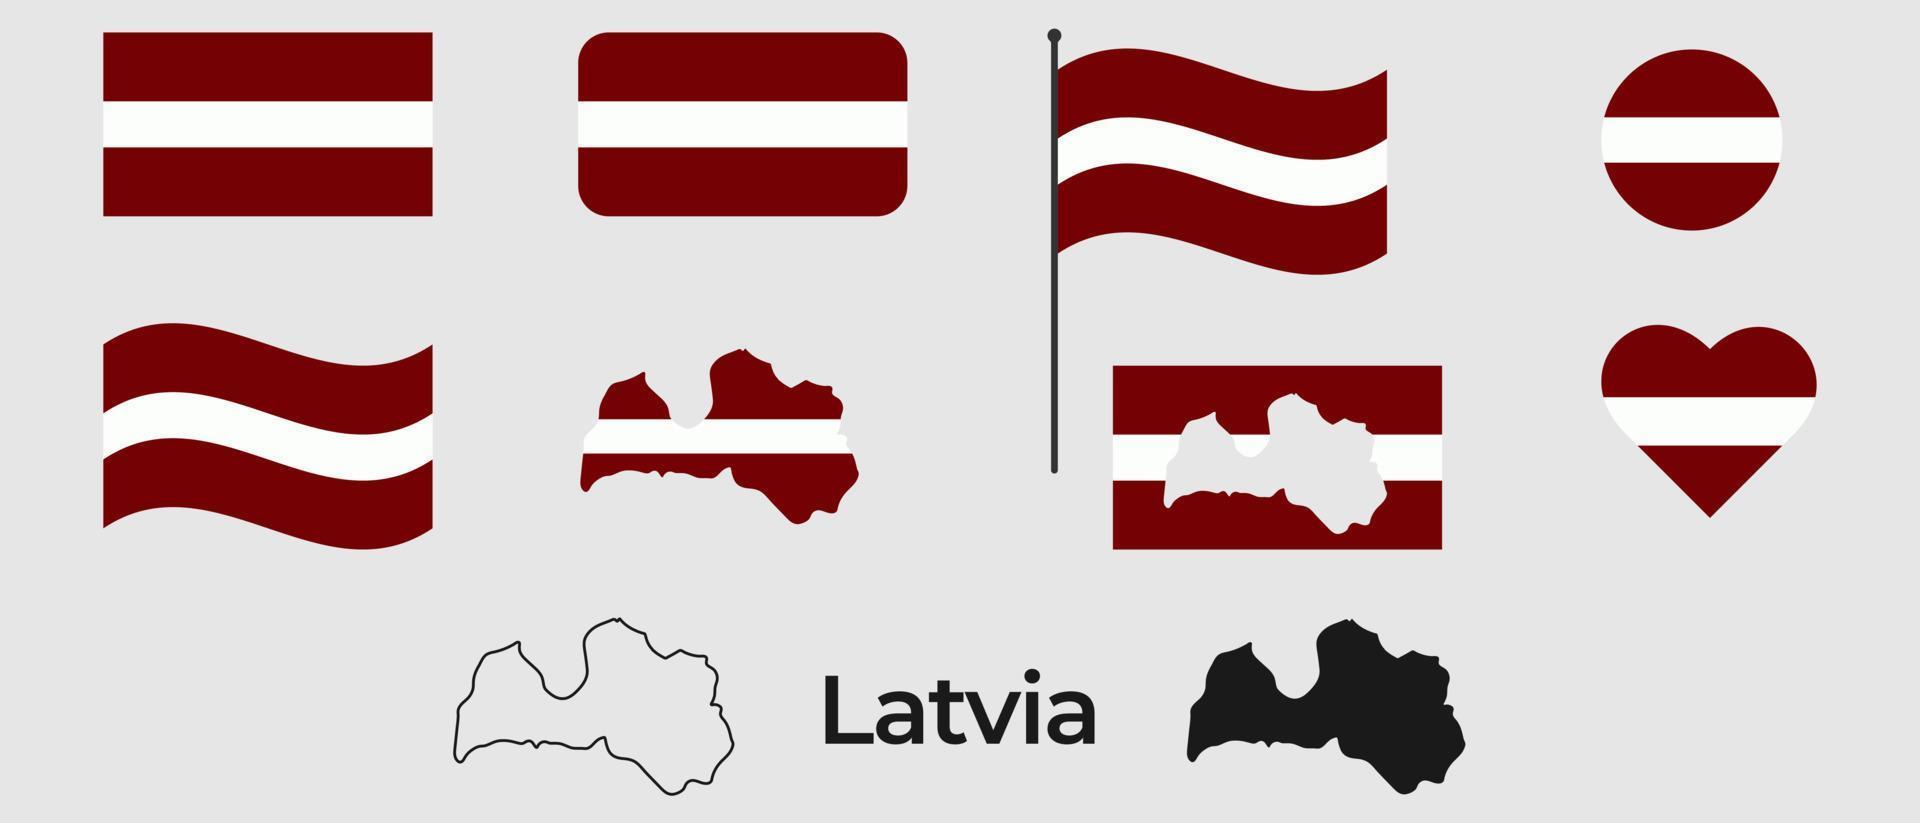 Flag of Latvia. Silhouette of Latvia. National symbol. Square, round and heart shape. The symbol of the Latvia flag. vector